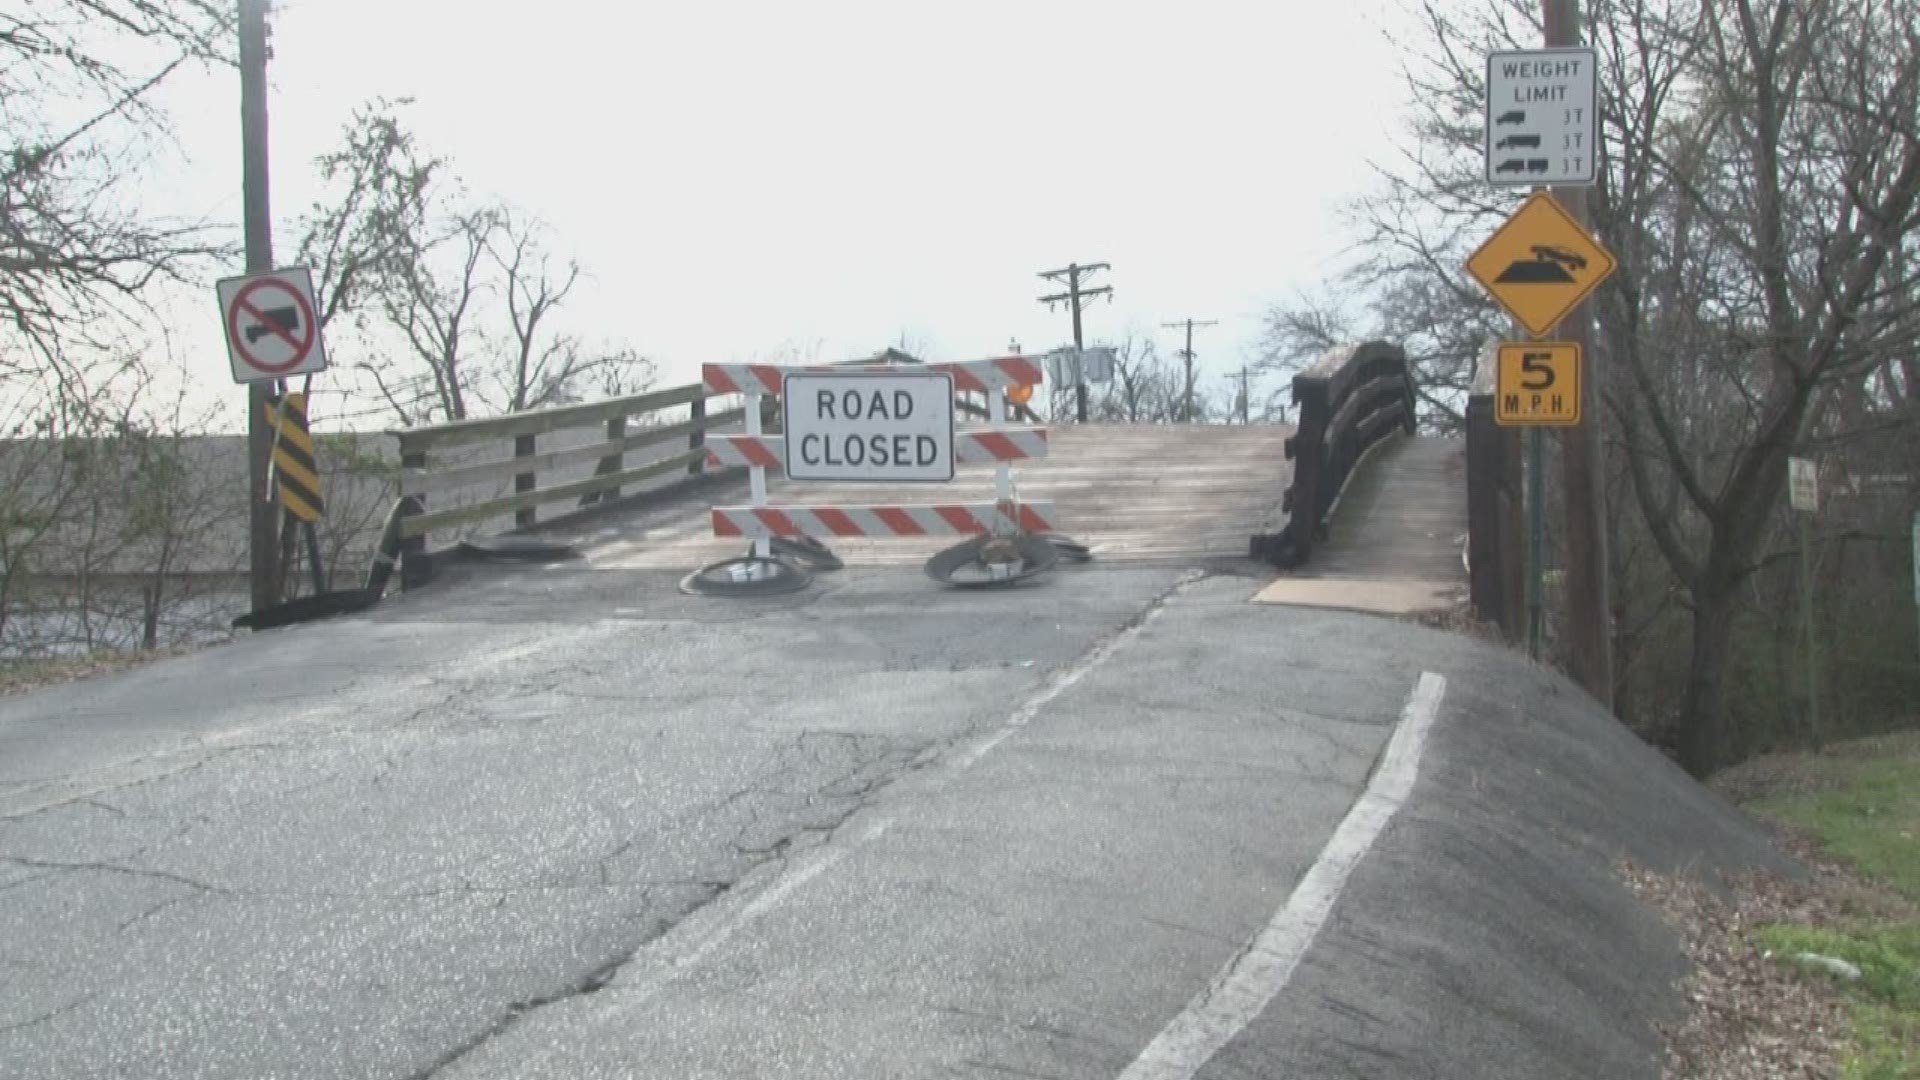 The 14th Street Bridge is slated for demolition, but it got a temporary reprieve tonight.